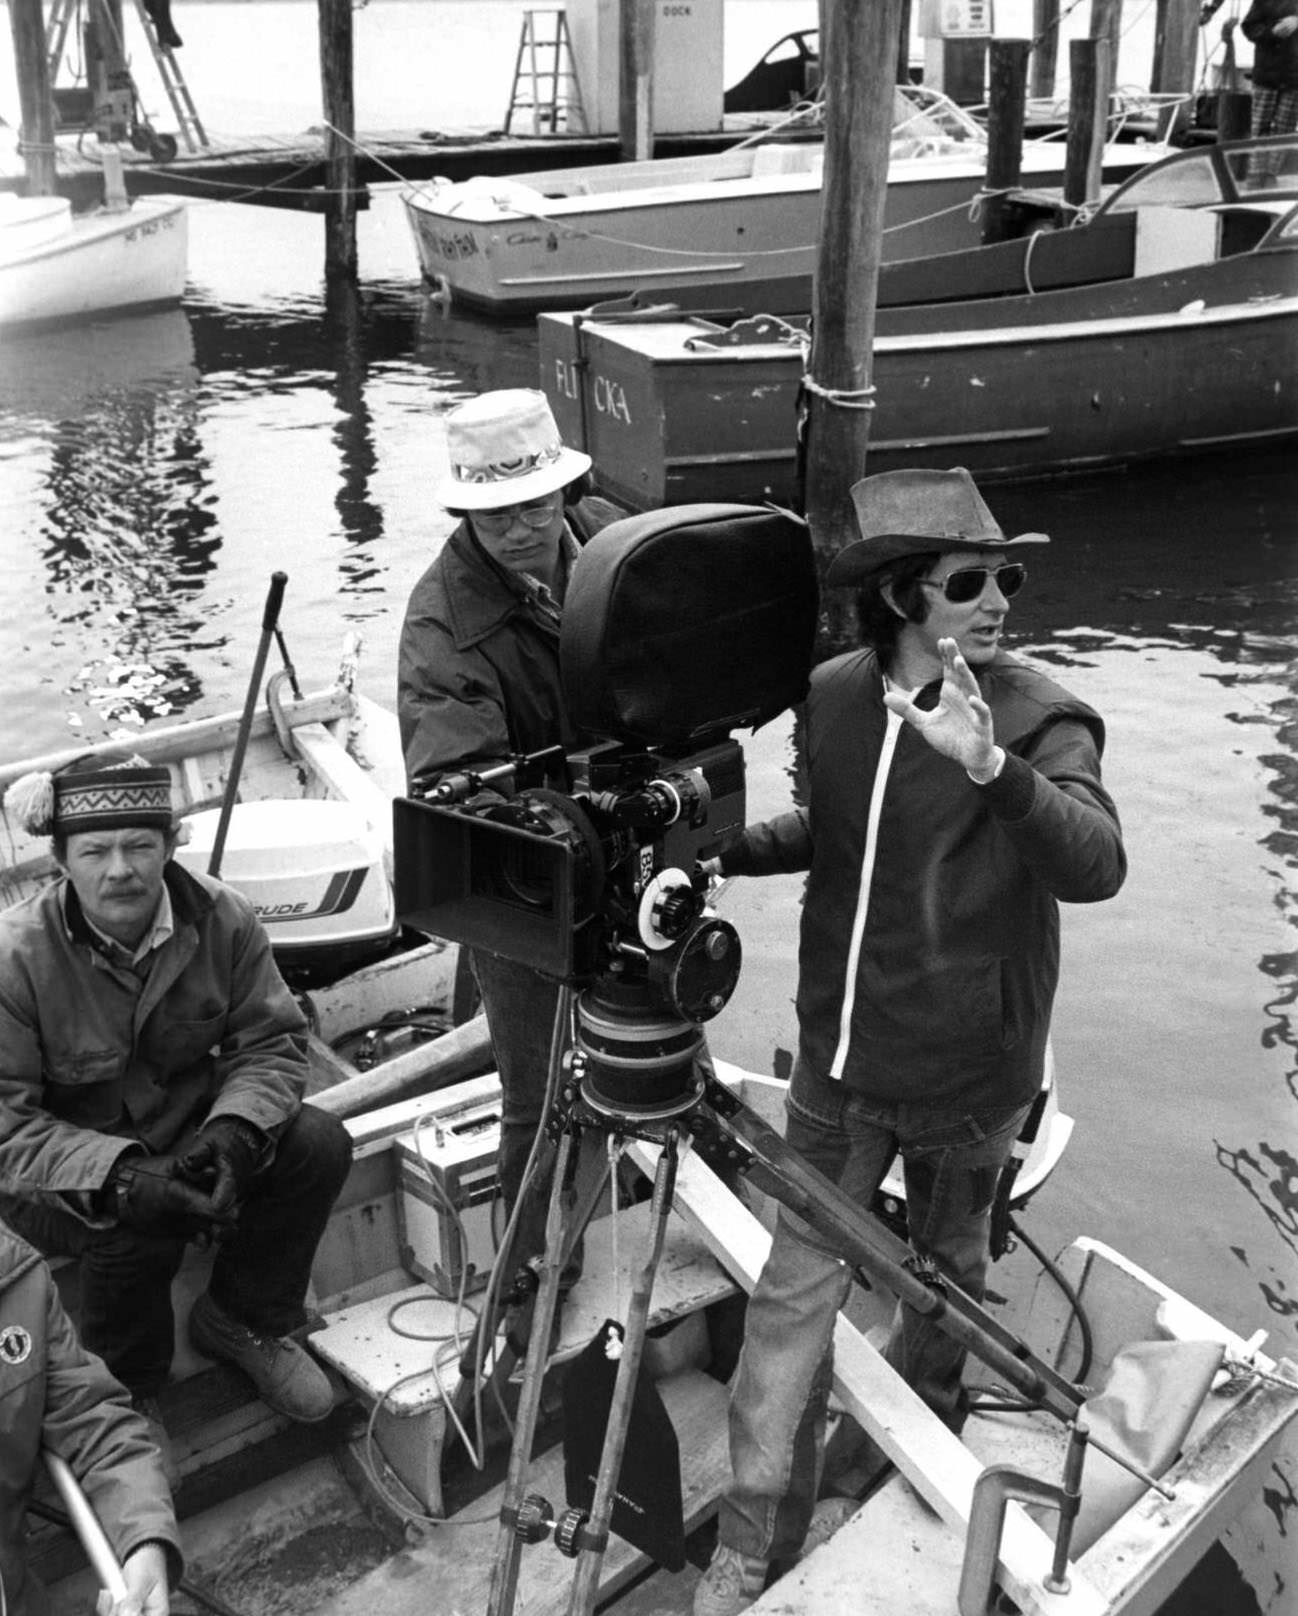 Martha's Vineyard, with Director Steven Spielberg and camera crew on the set of the Universal Pictures production of 'Jaws' in 1975 in Martha's Vineyard, Massachusetts.